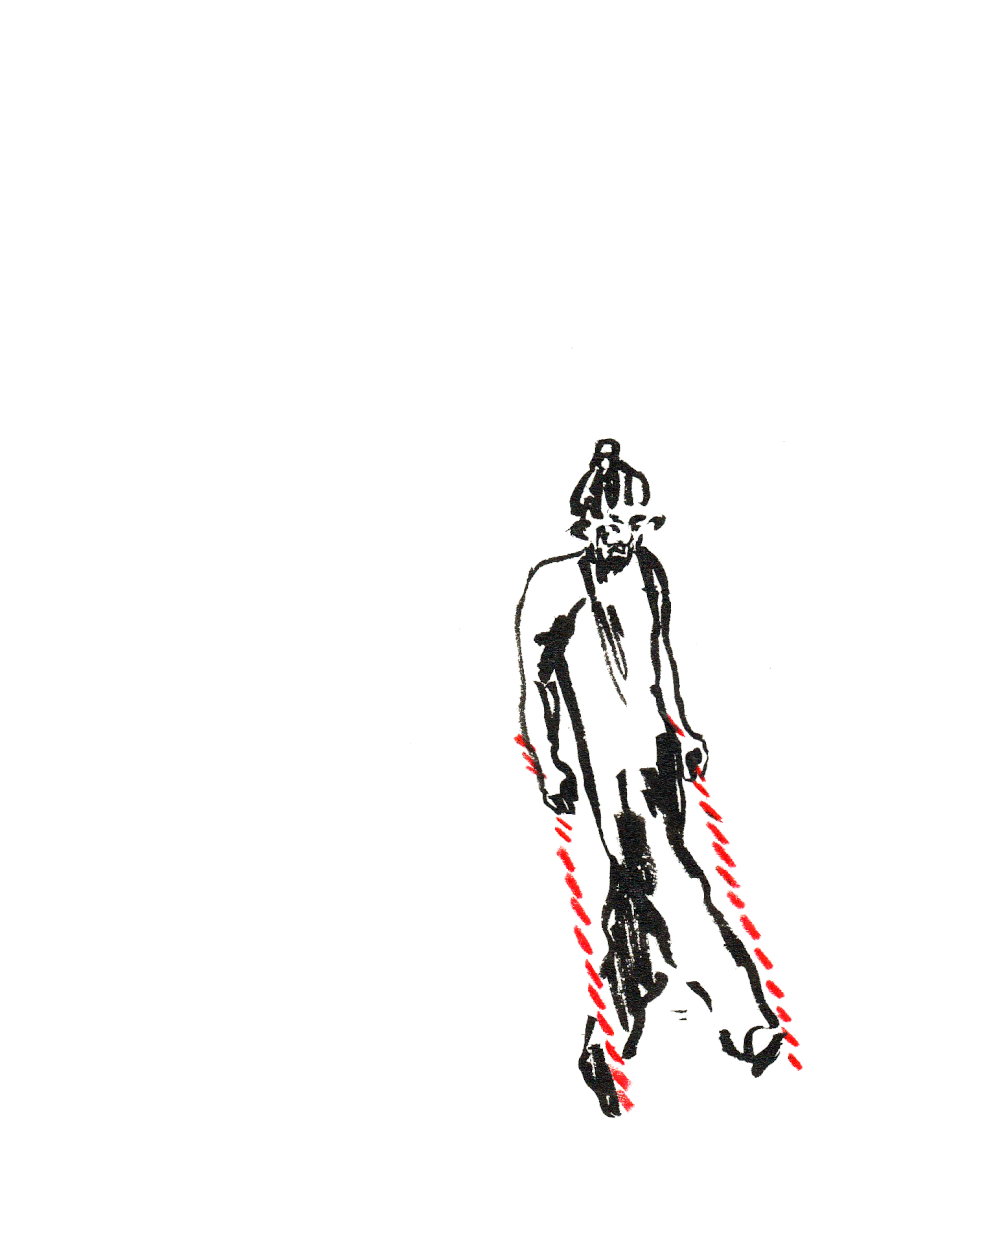 GIF: Black and red illustration on a man performing a handstand on his crutches. The crutches are red and white.